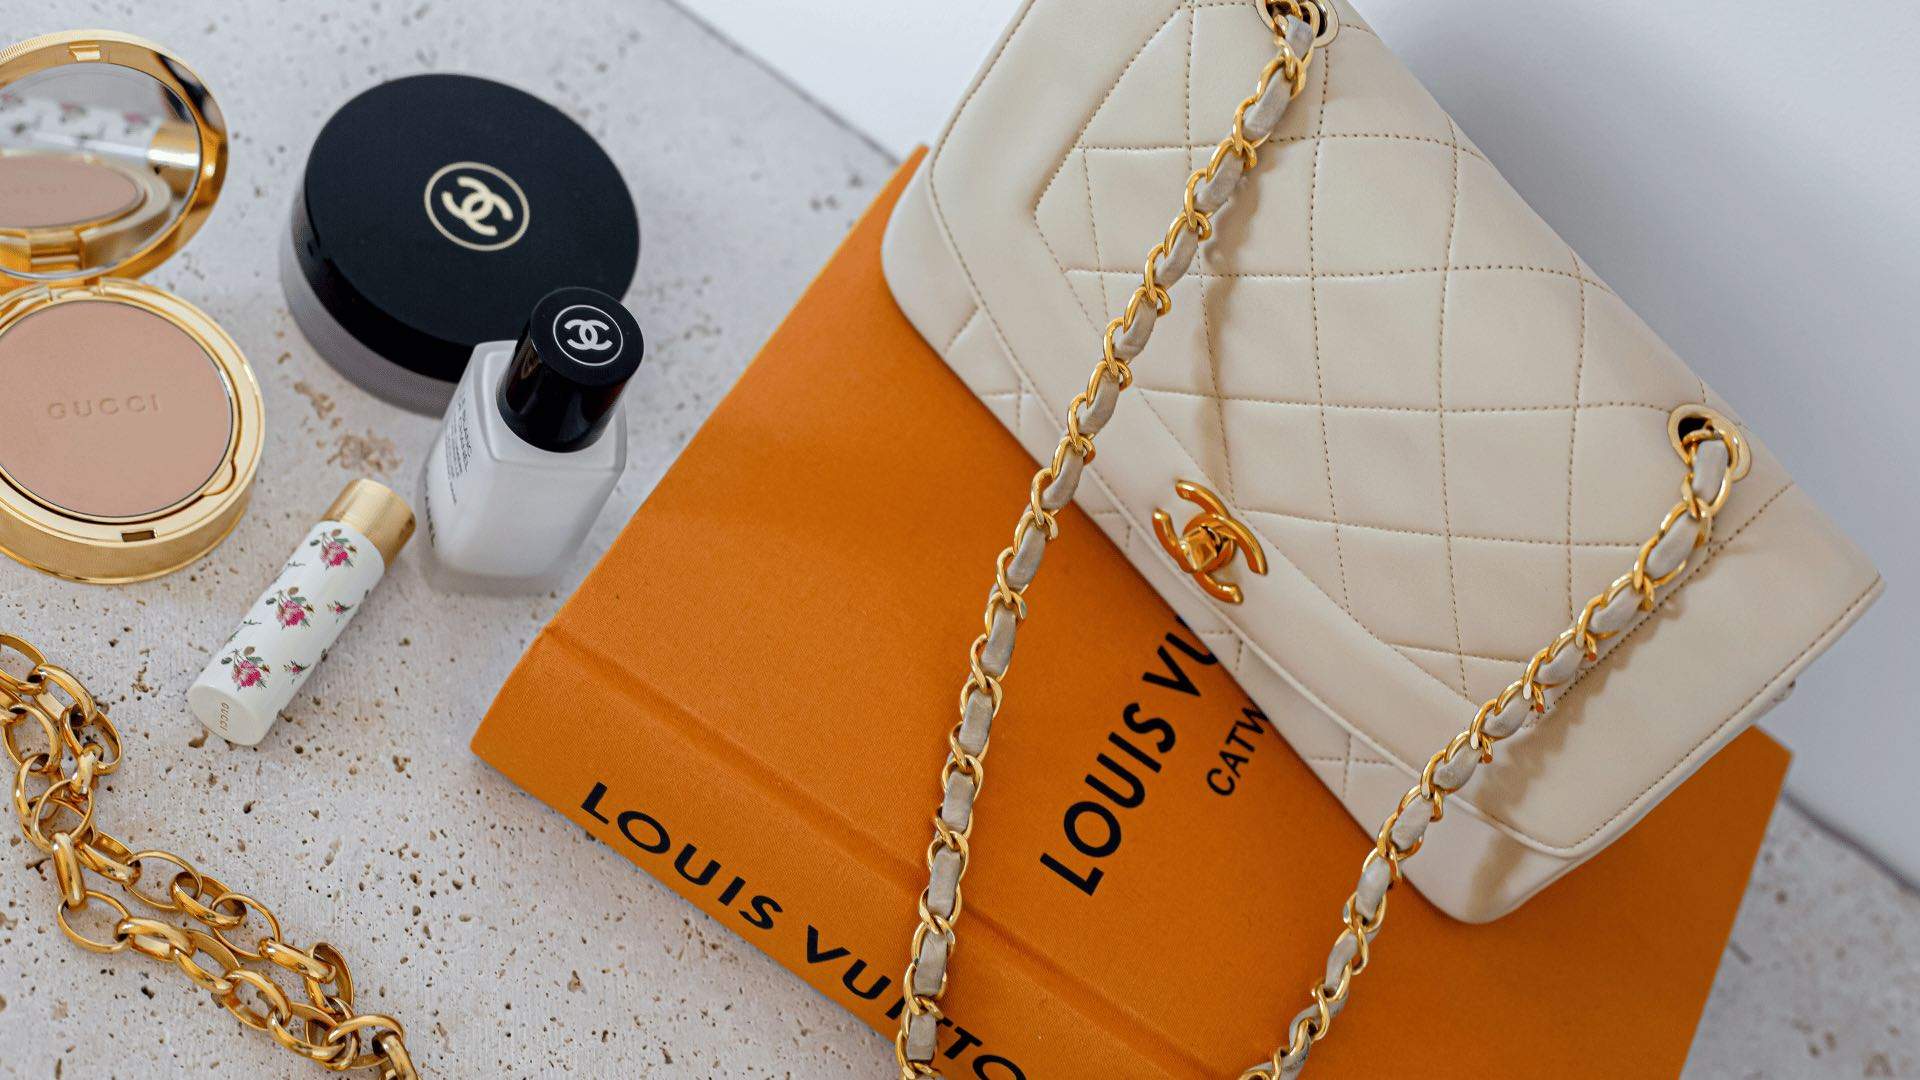 A Chanel bag on top of a Louis Vuitton coffee table book.